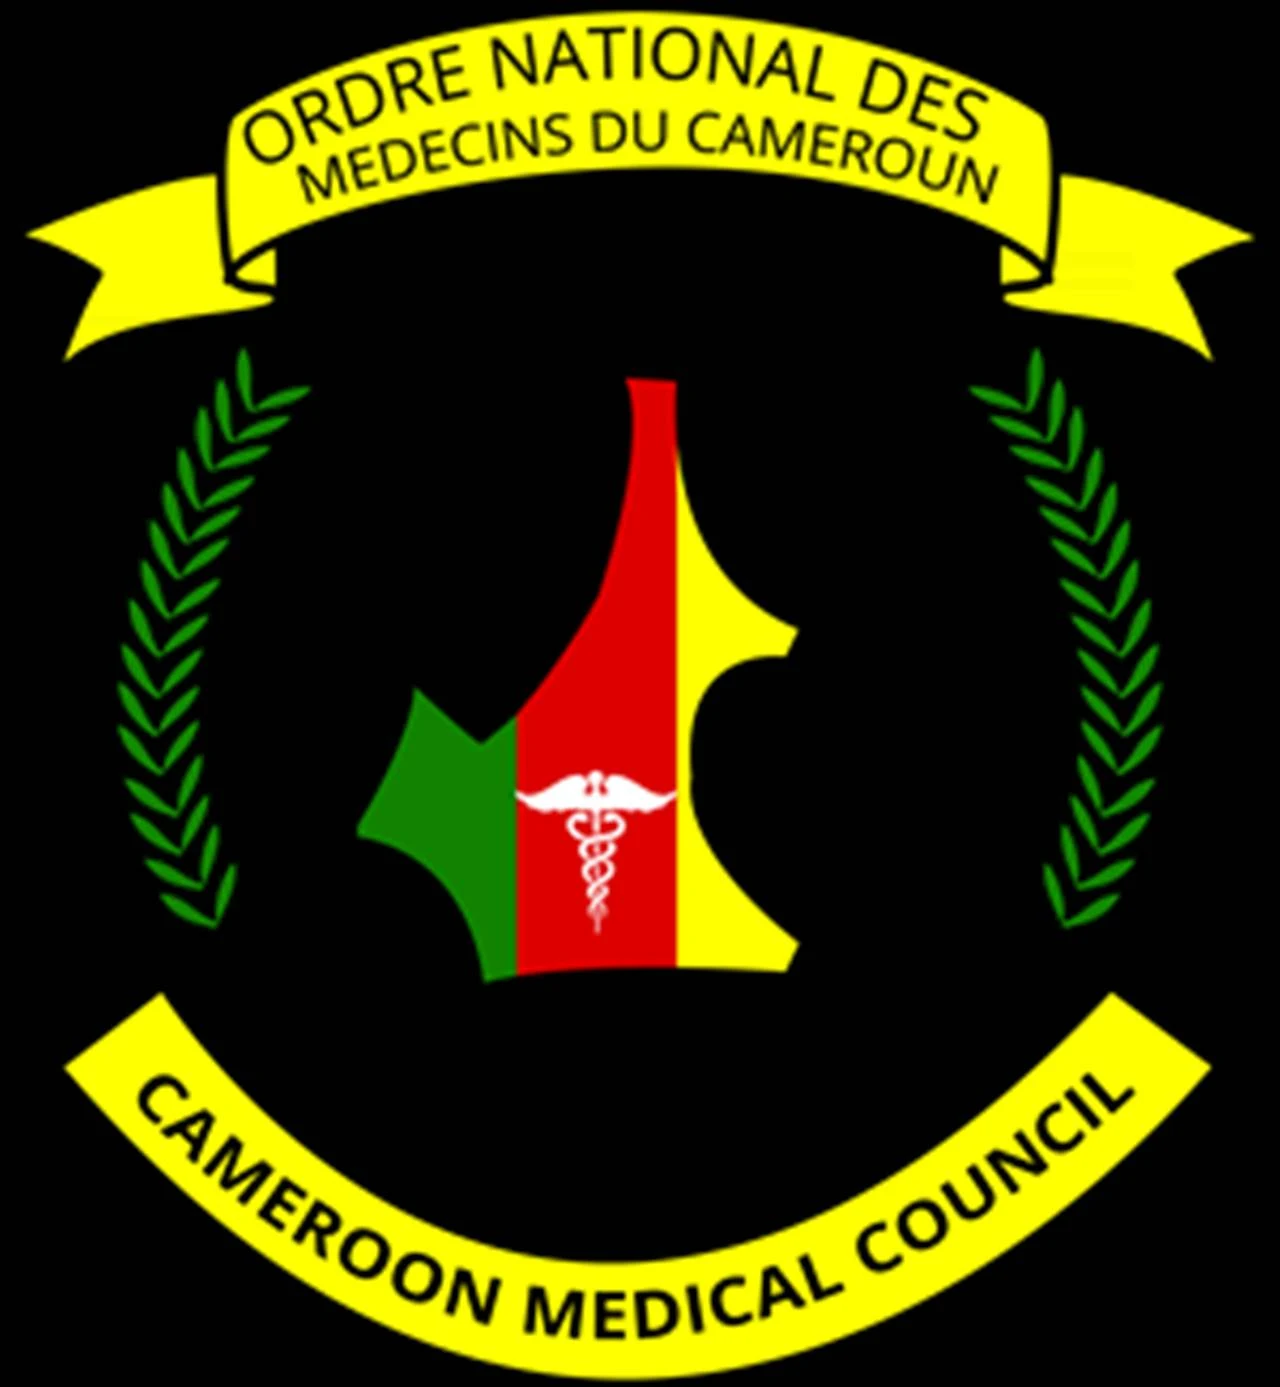 Cameroon Medical Council (ONMC) Demands Better Working Conditions for Doctors